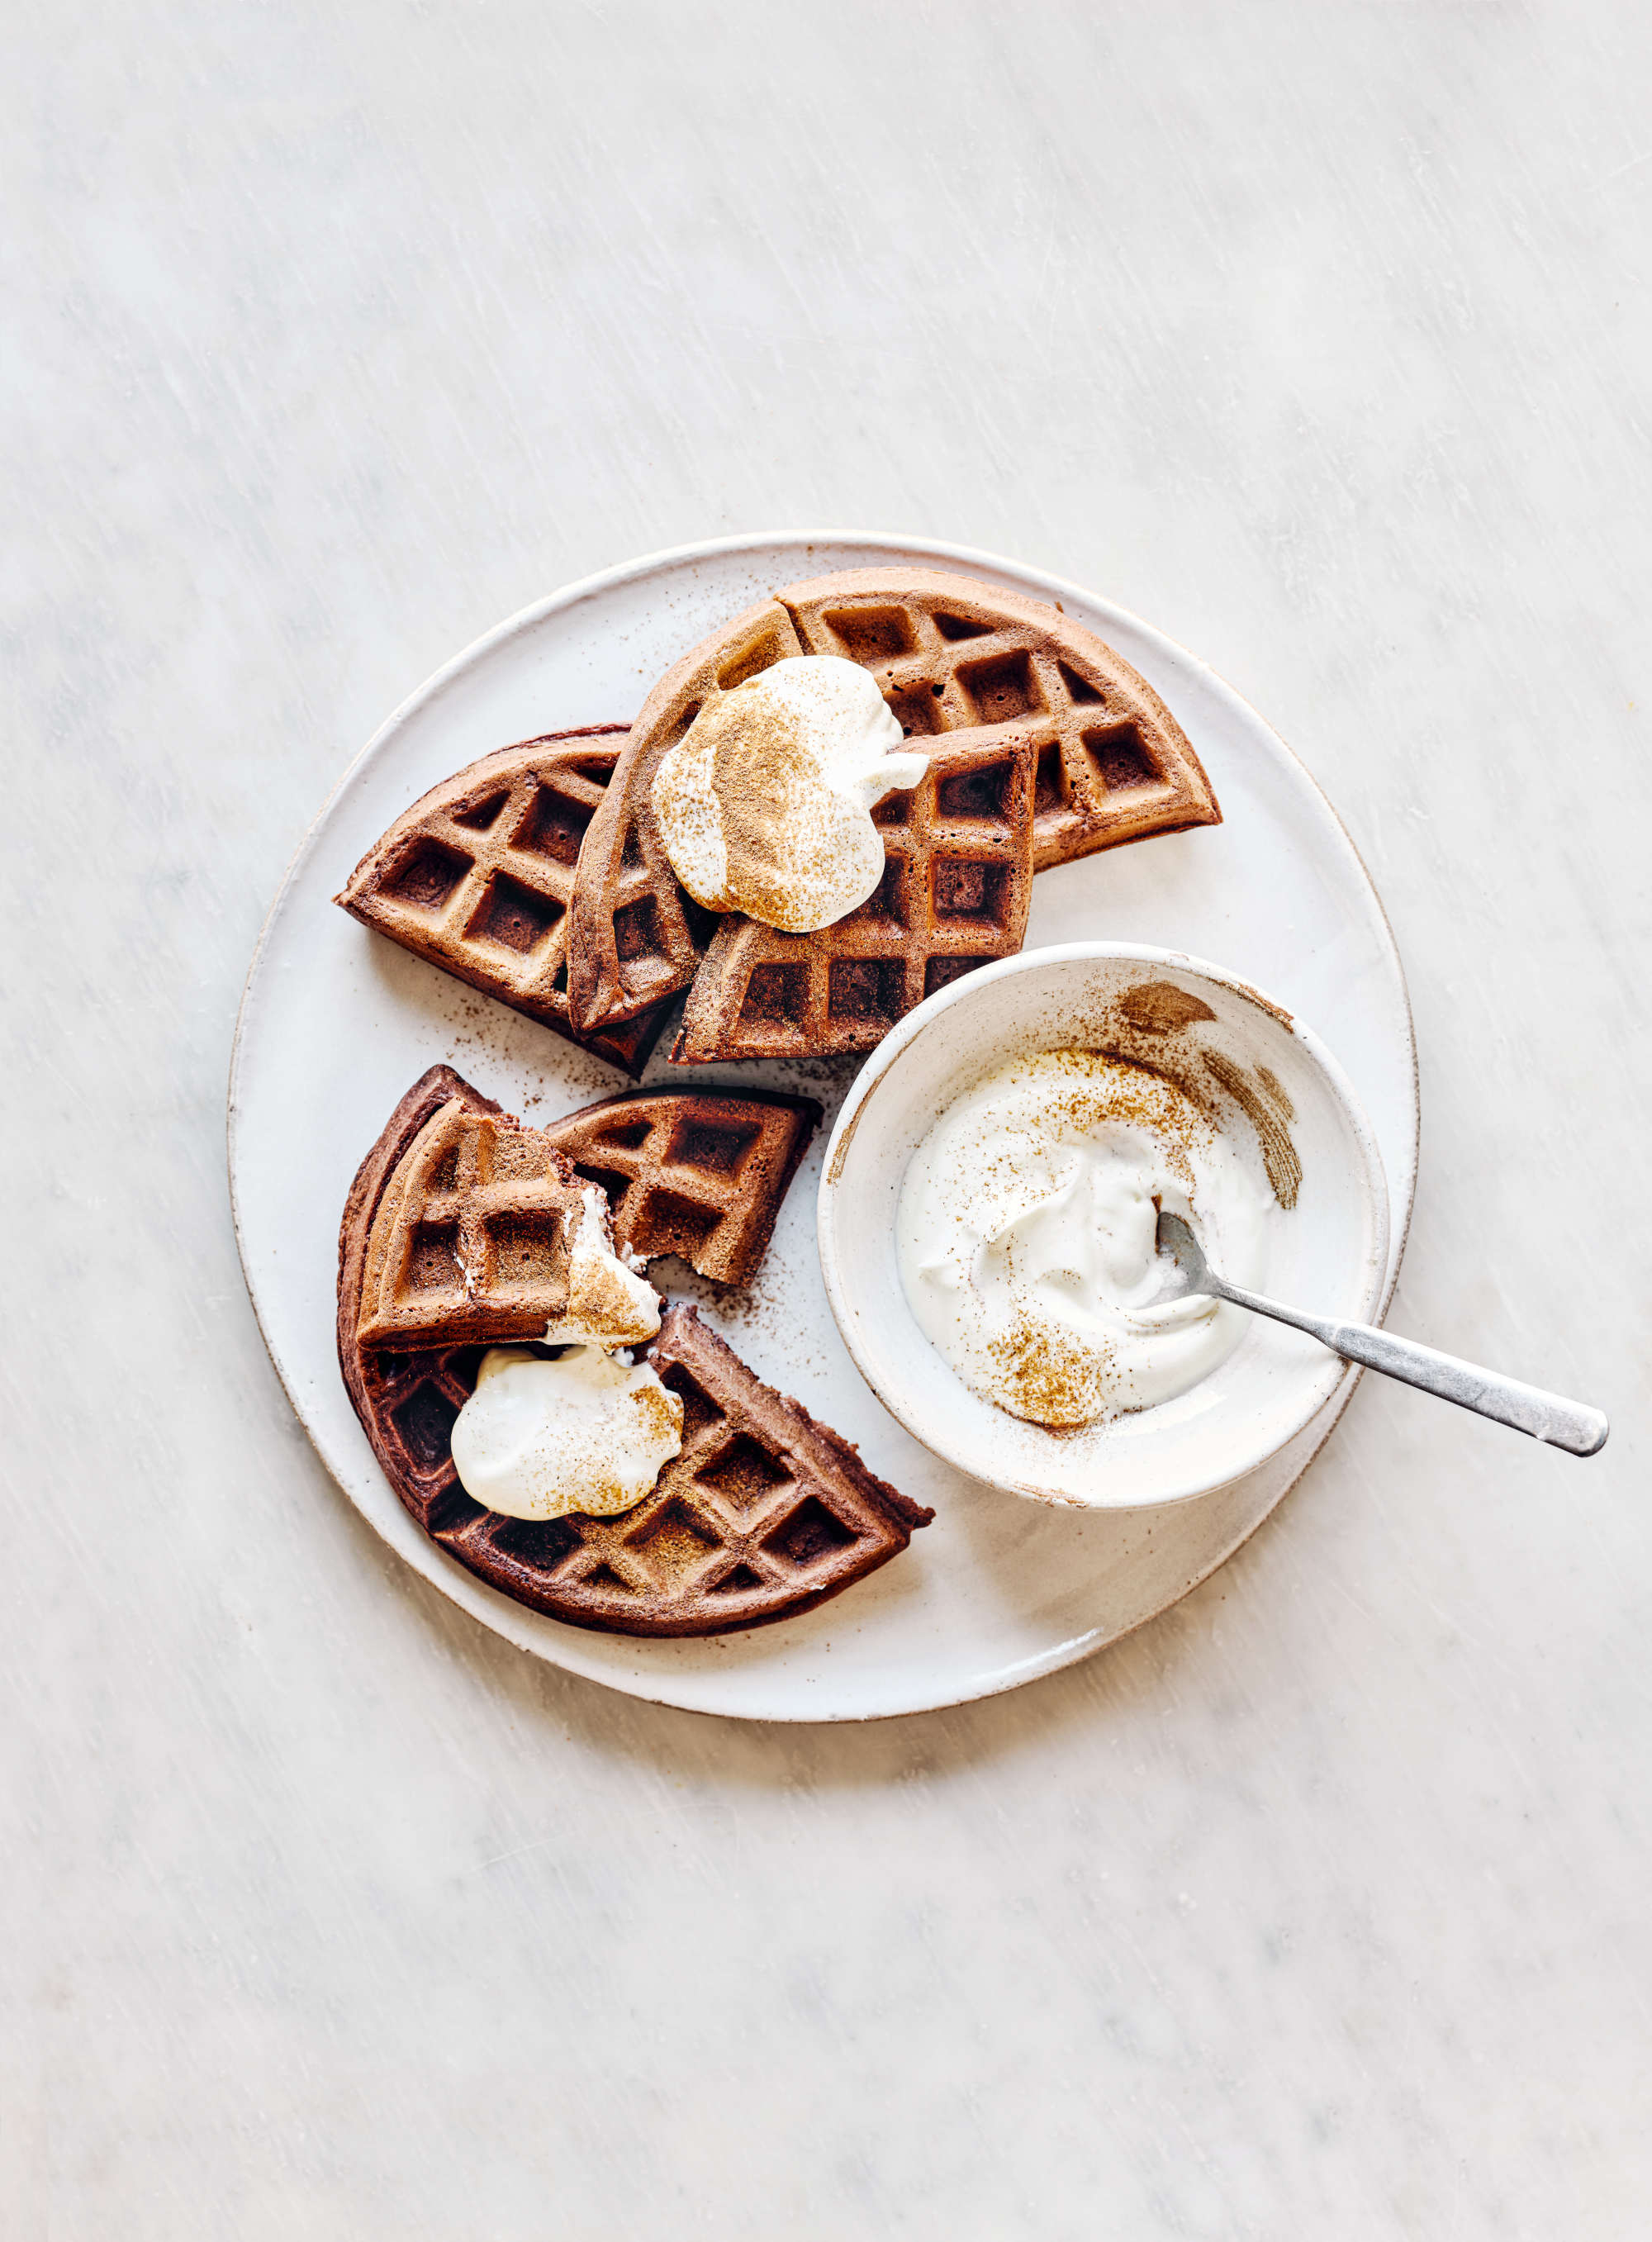 Chocolate Belgian waffles with sour cream. Photography by Haarala Hamilton